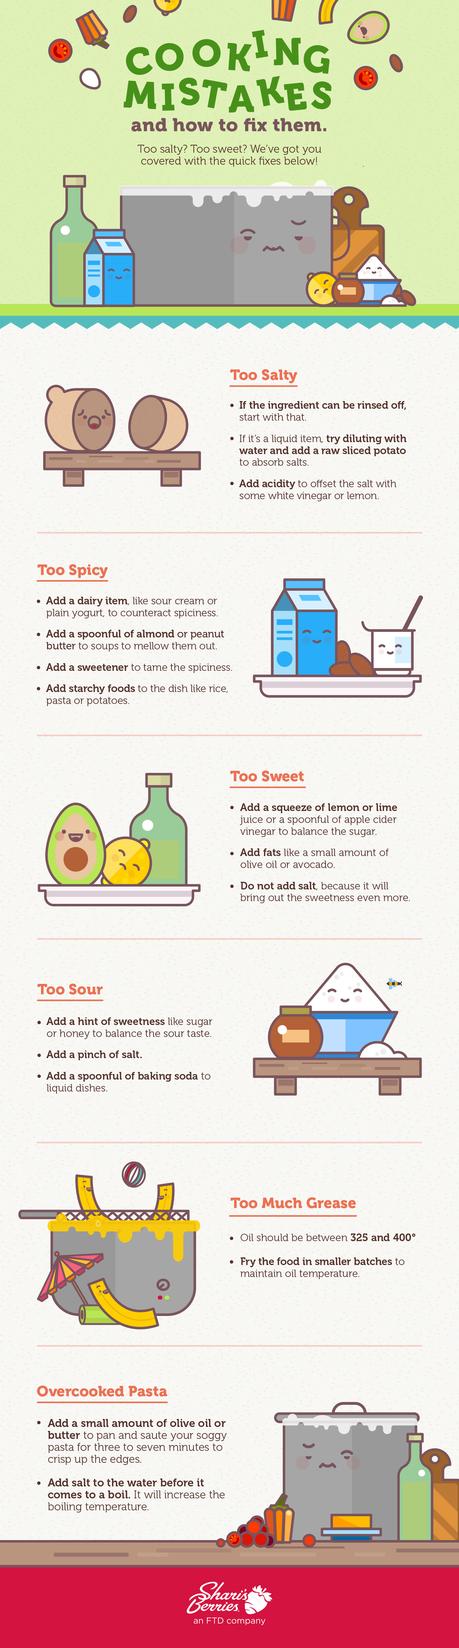 Image: how to fix baking cooking mistakes